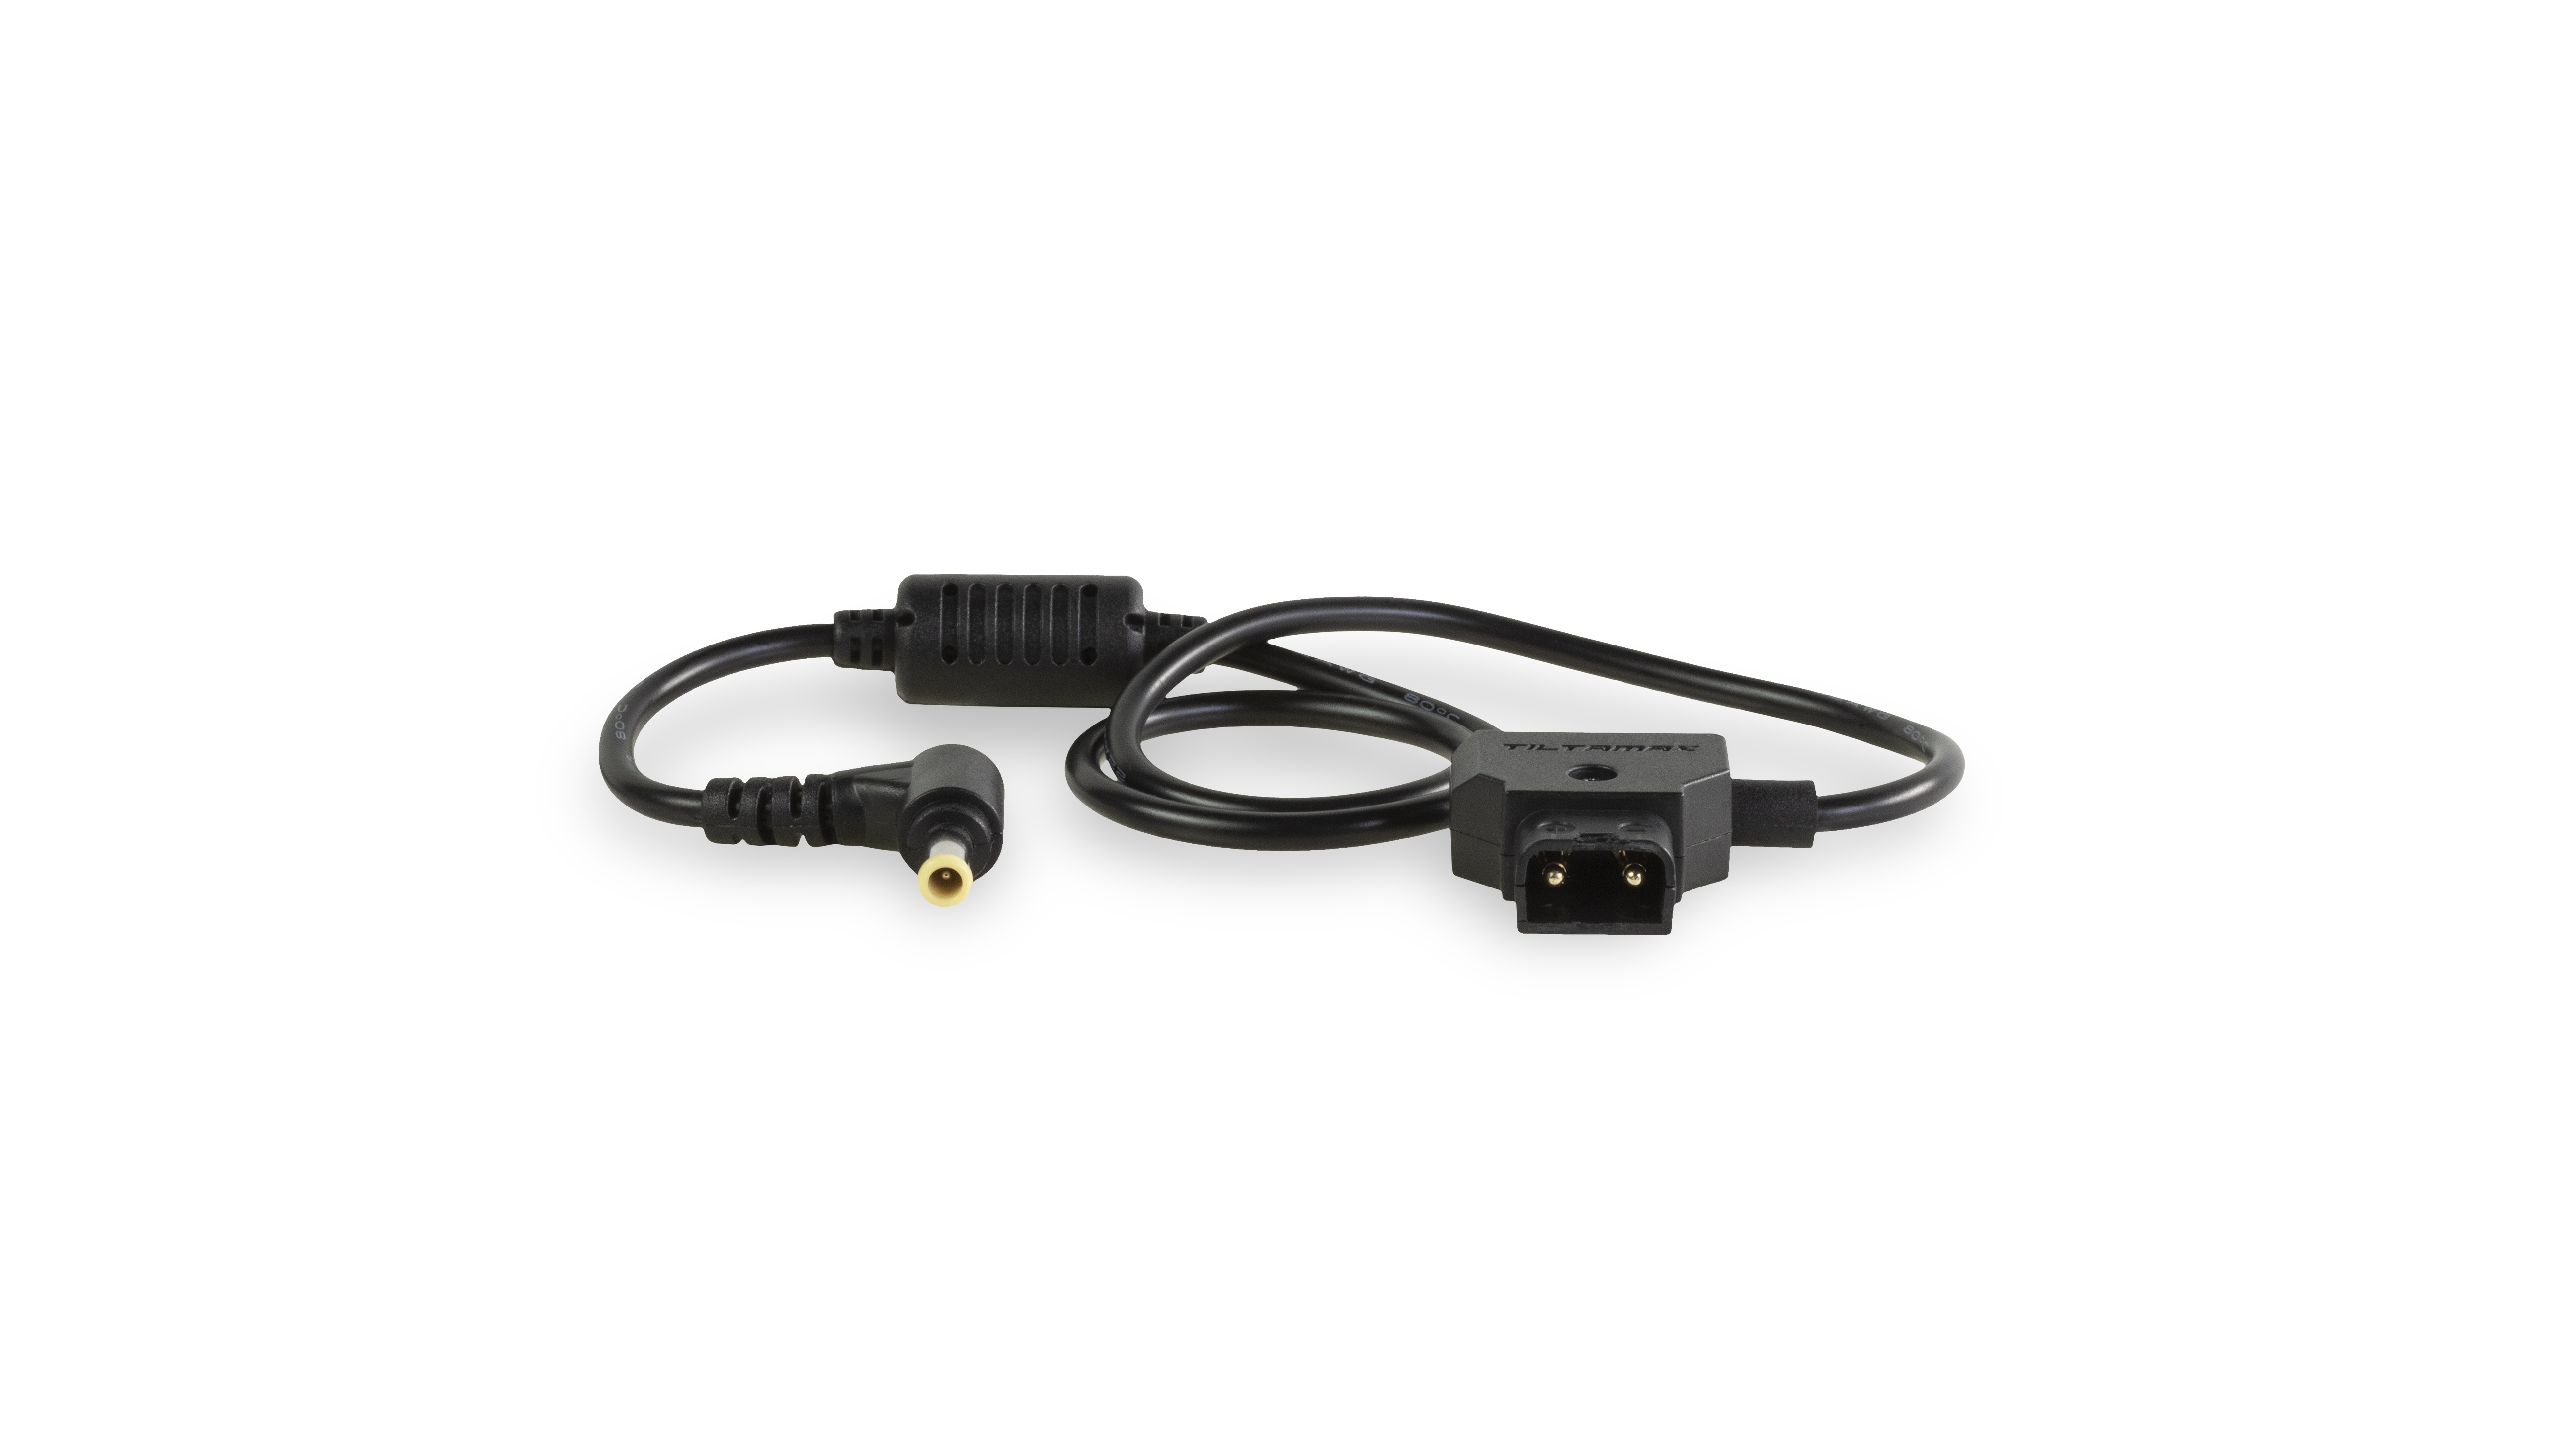 P-TAP to 5.0/3.0mm DC Male Cable for Sony FS7 and FS5